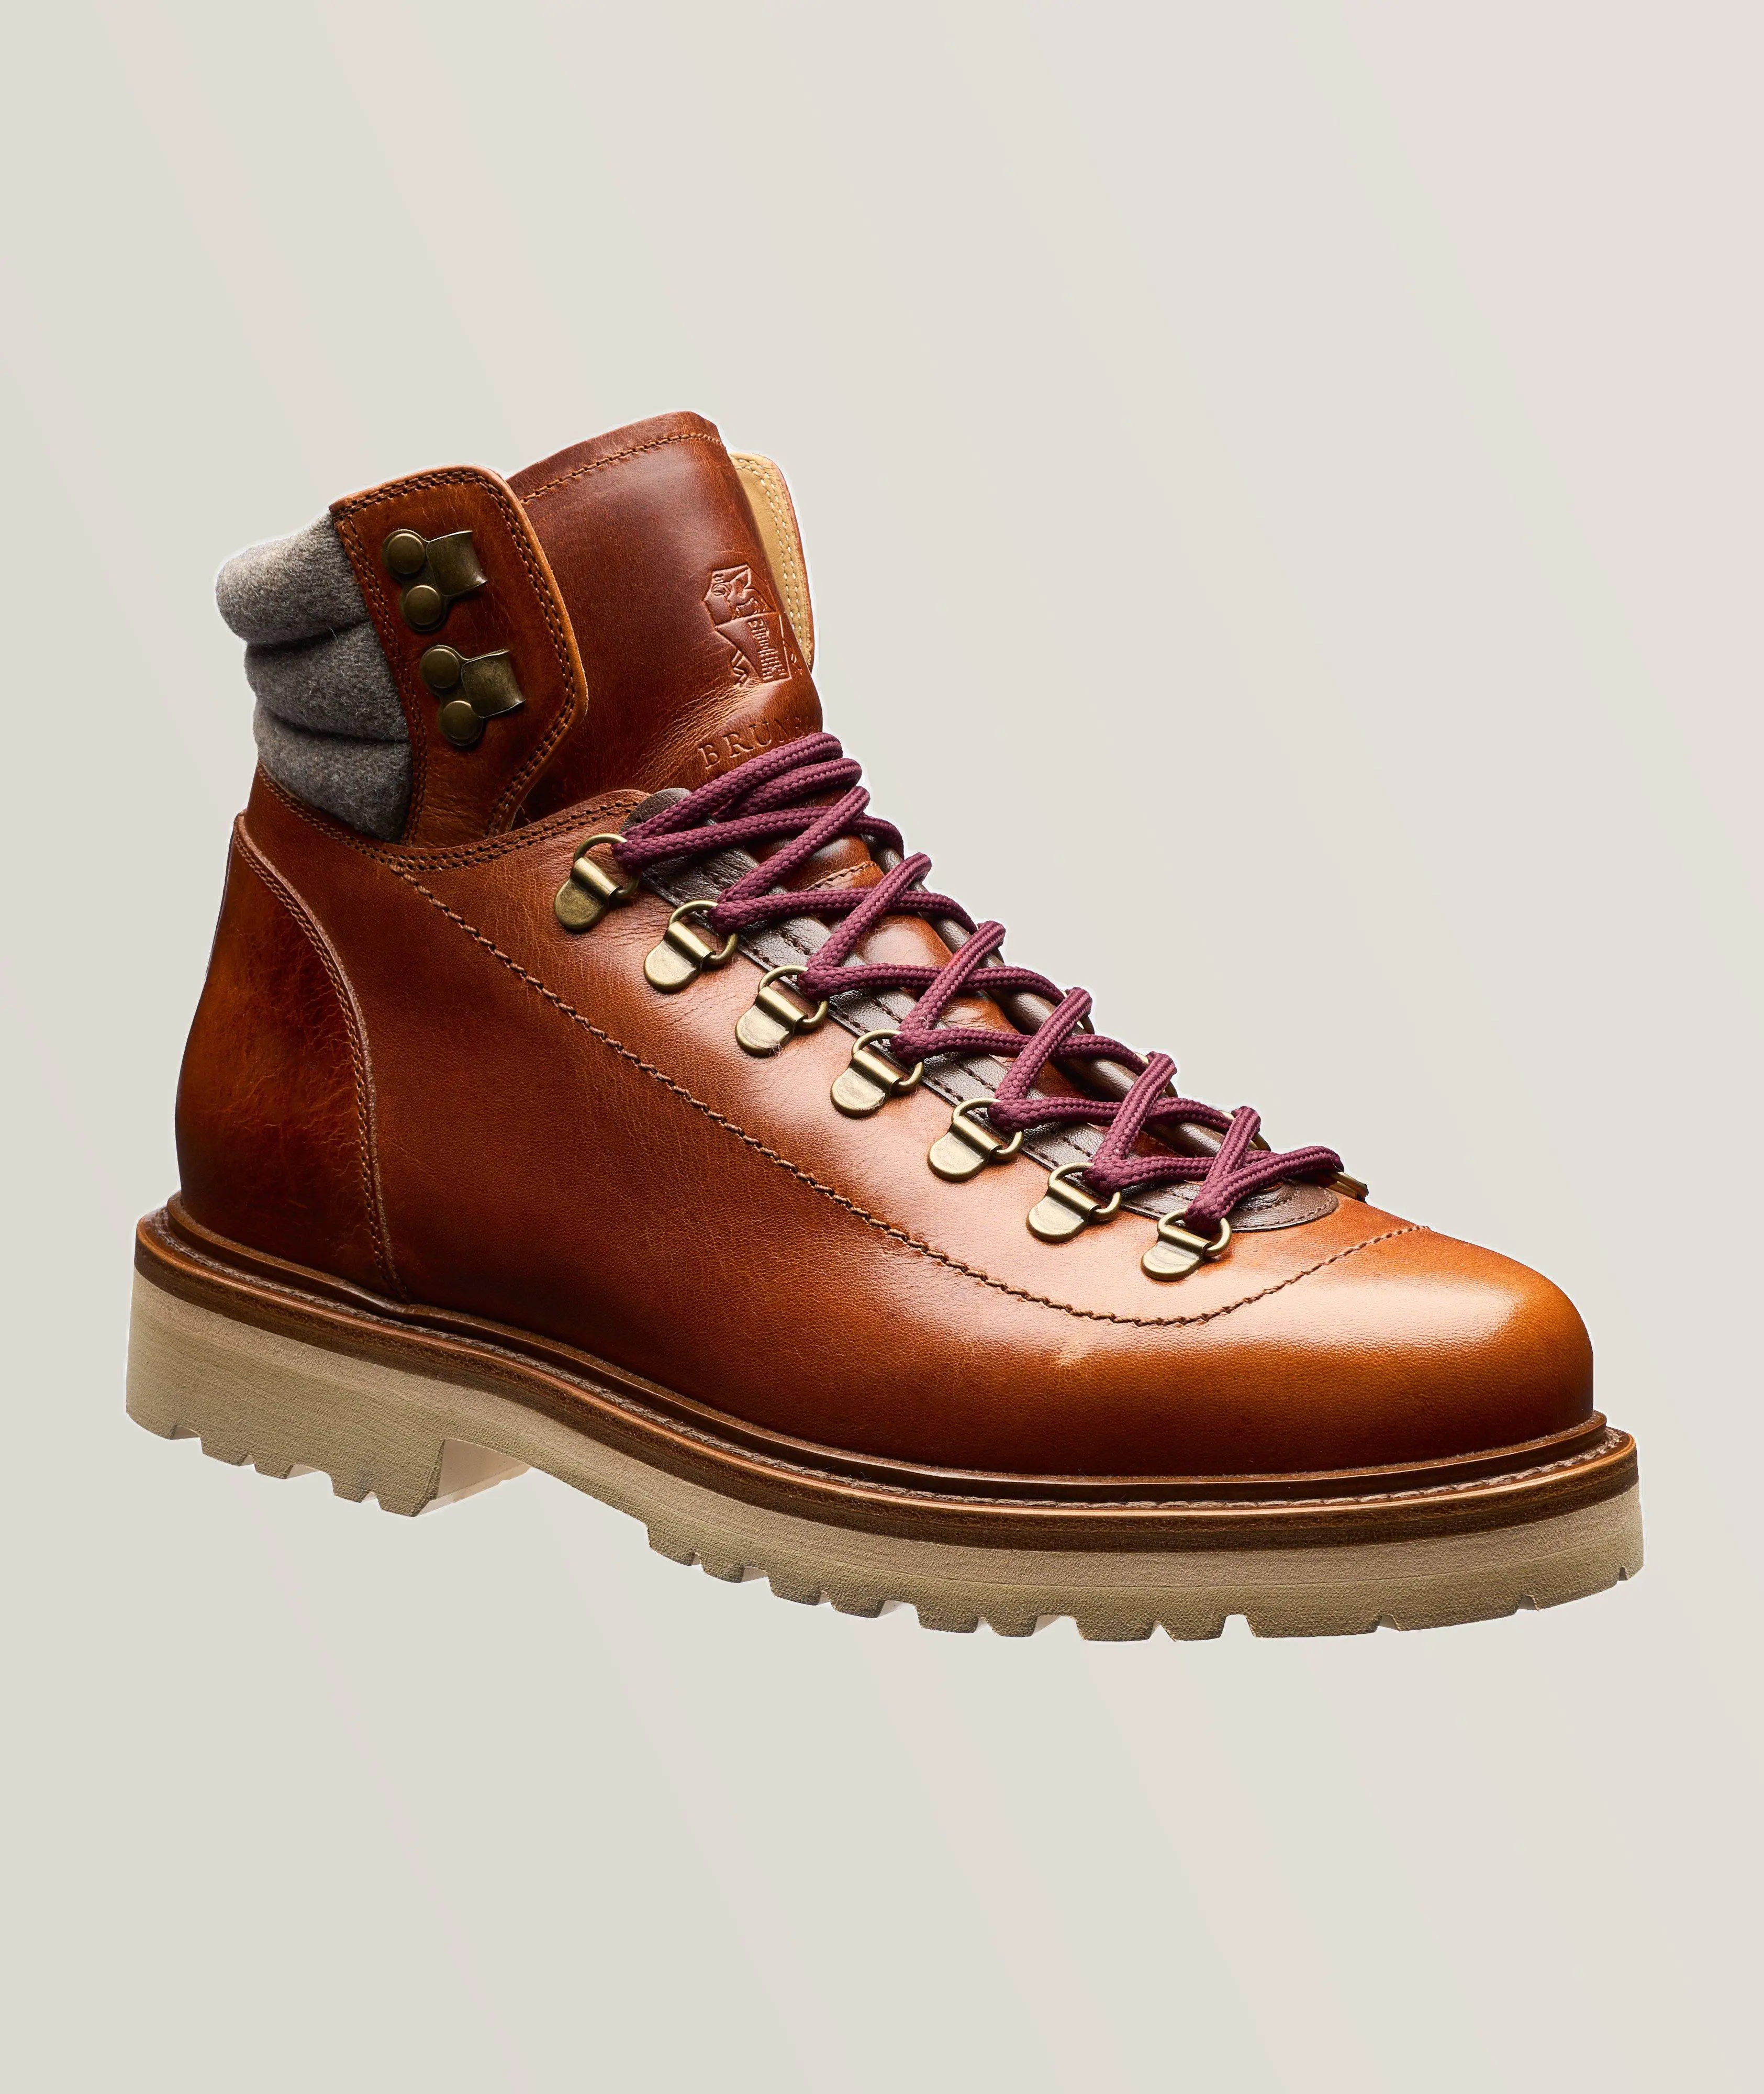 Harry Rosen Lace-Up Leather Hiking Boots. 1